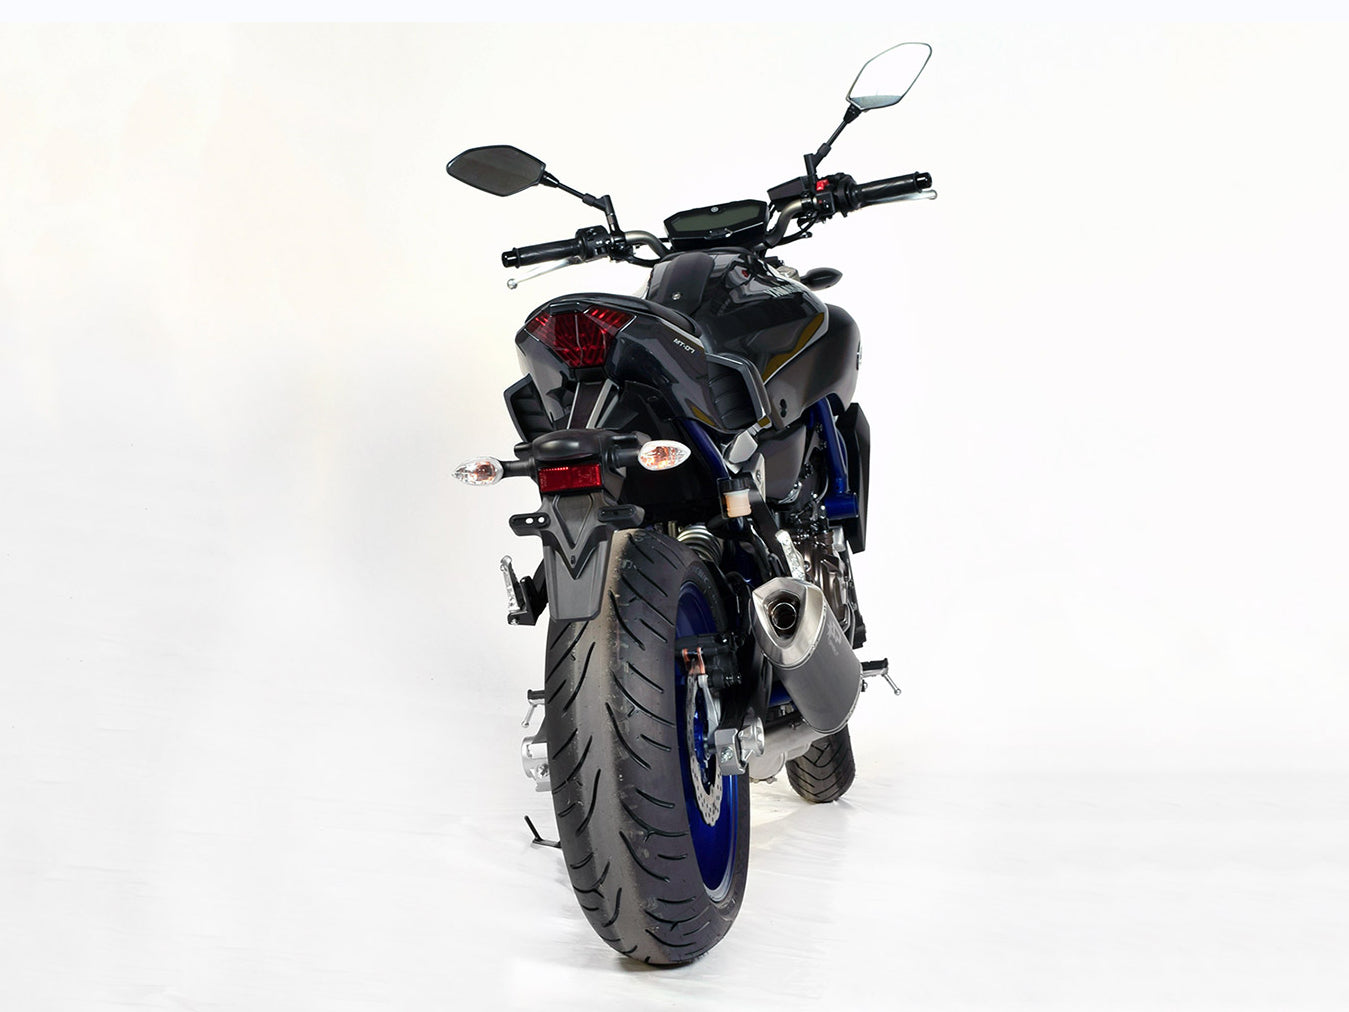 SPARK Yamaha MT-07 Full Exhaust System "Force" (EU homologated; lateral position)